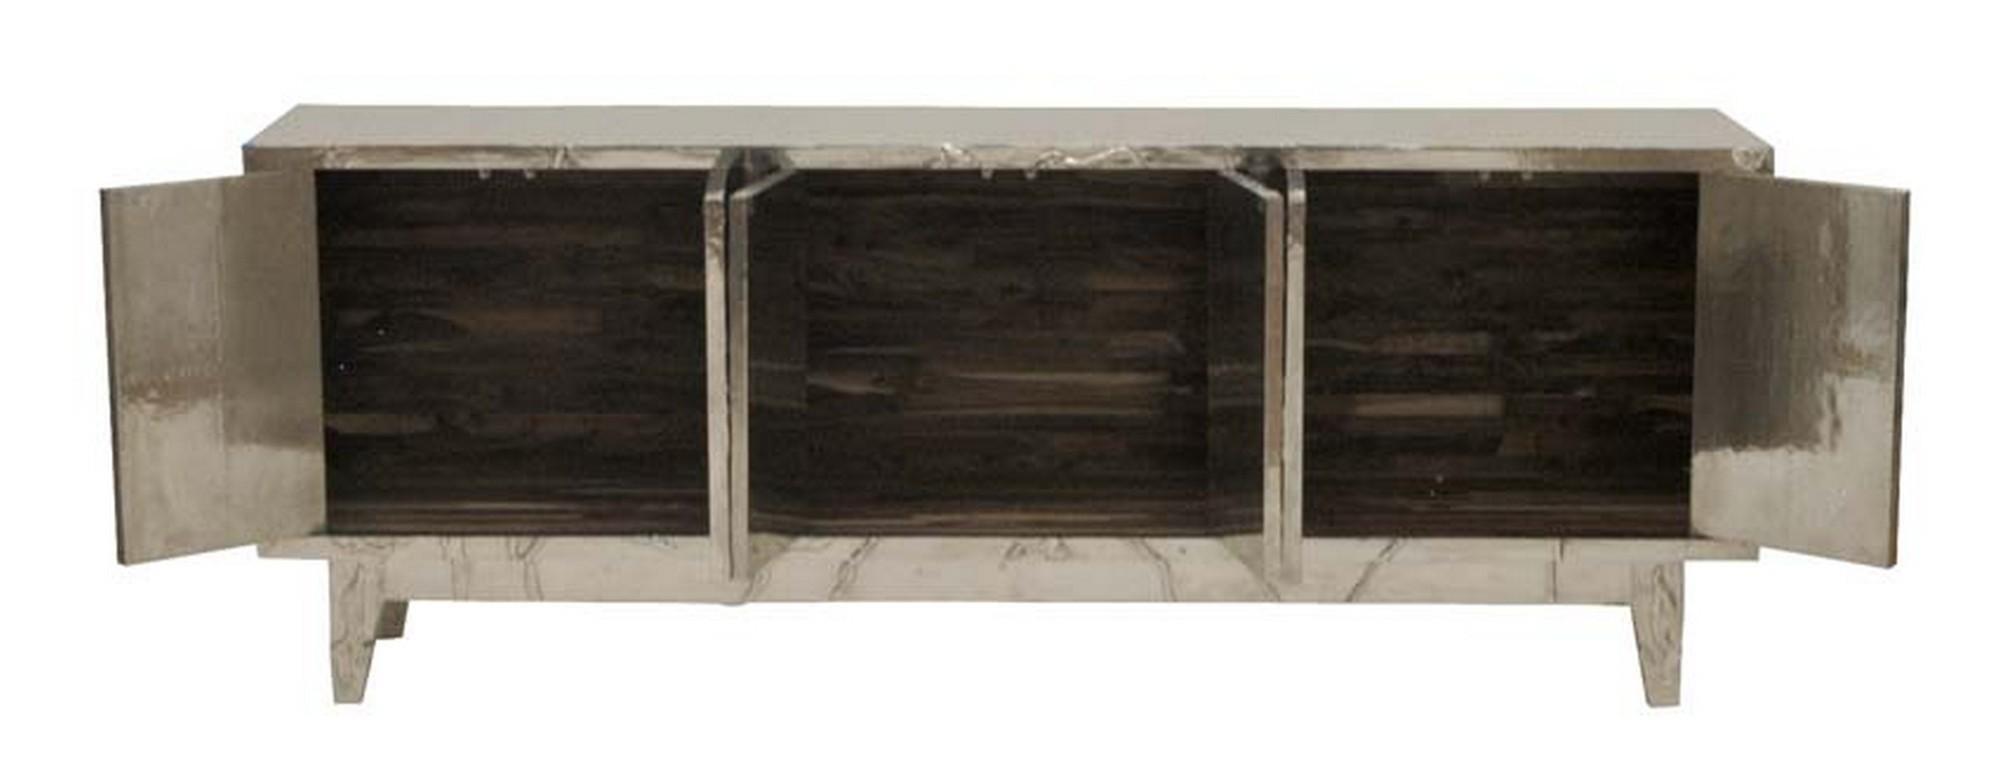 Floral Credenza in White Bronze Clad Over MDF Handcrafted In India For Sale 7